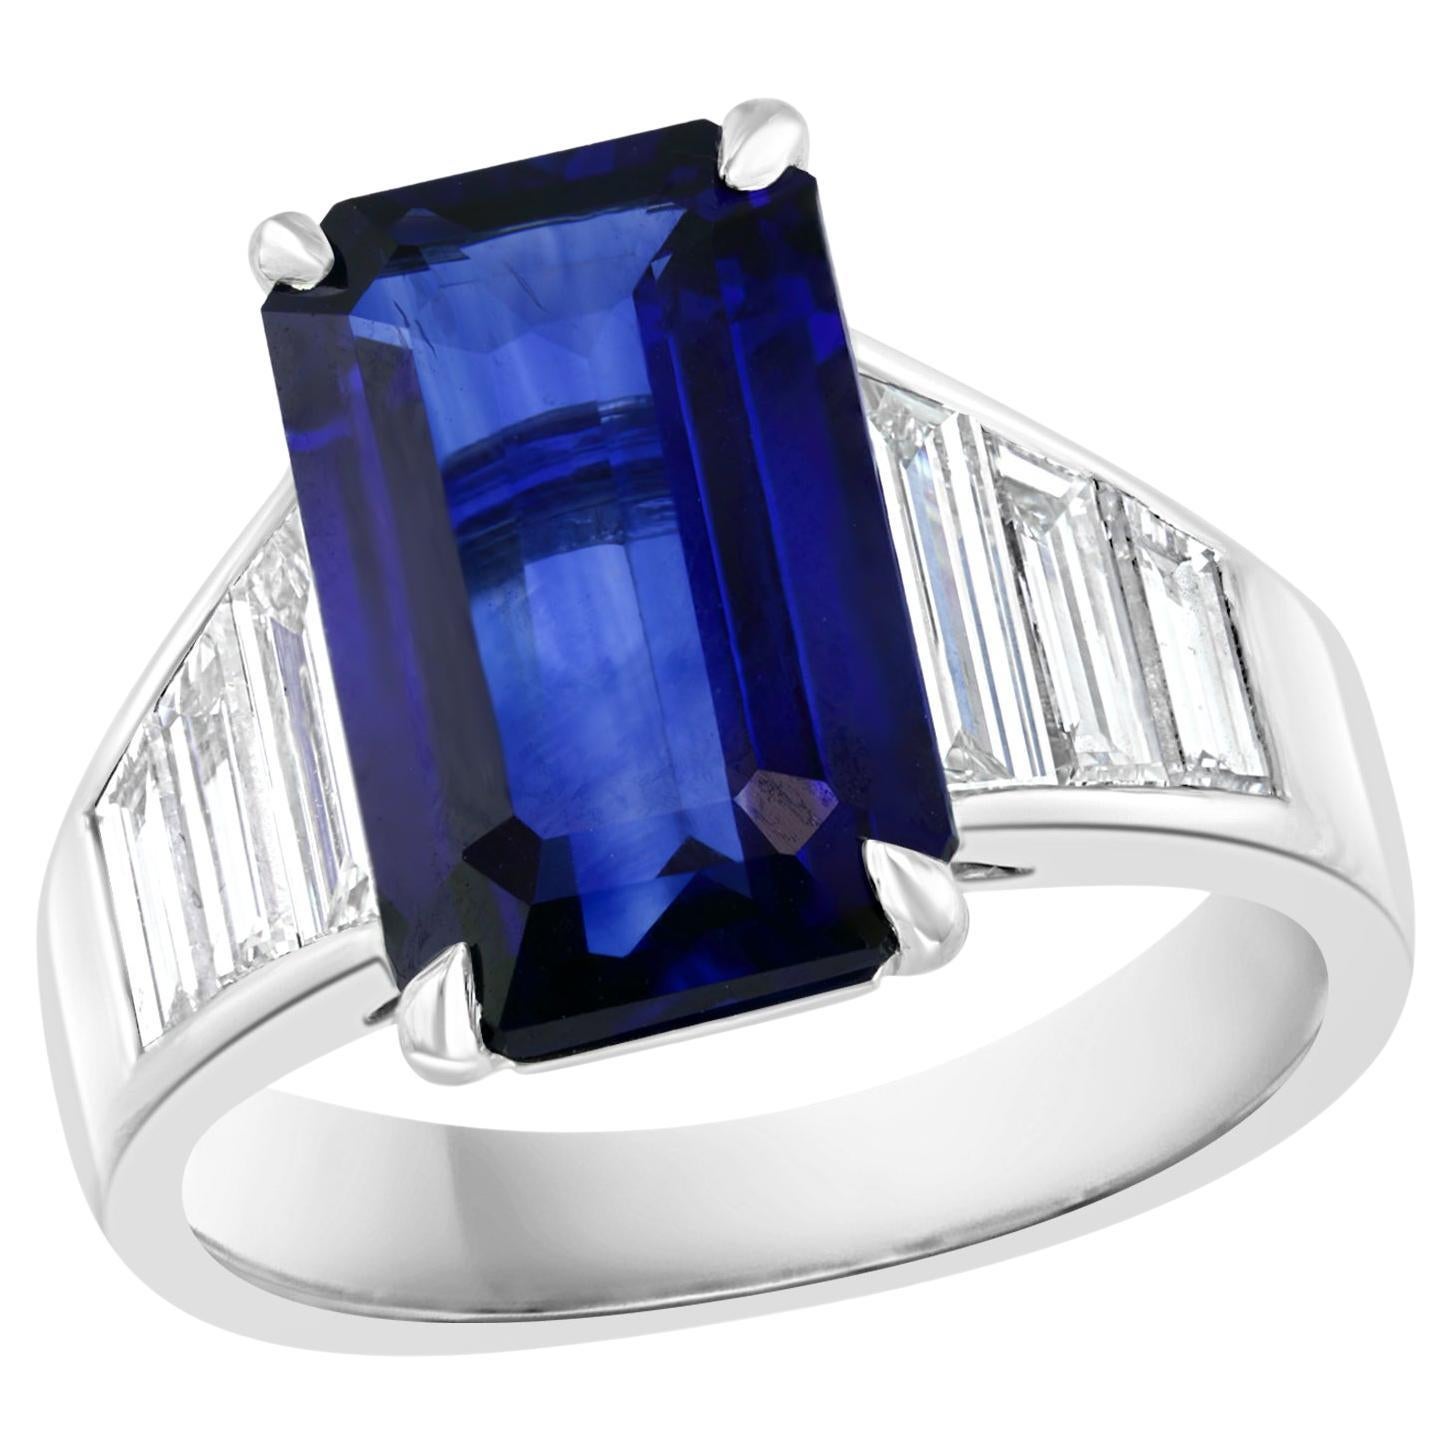 Certified 5.13 Carat Emerald Cut Sapphire Diamond Engagement Ring in Platinum For Sale